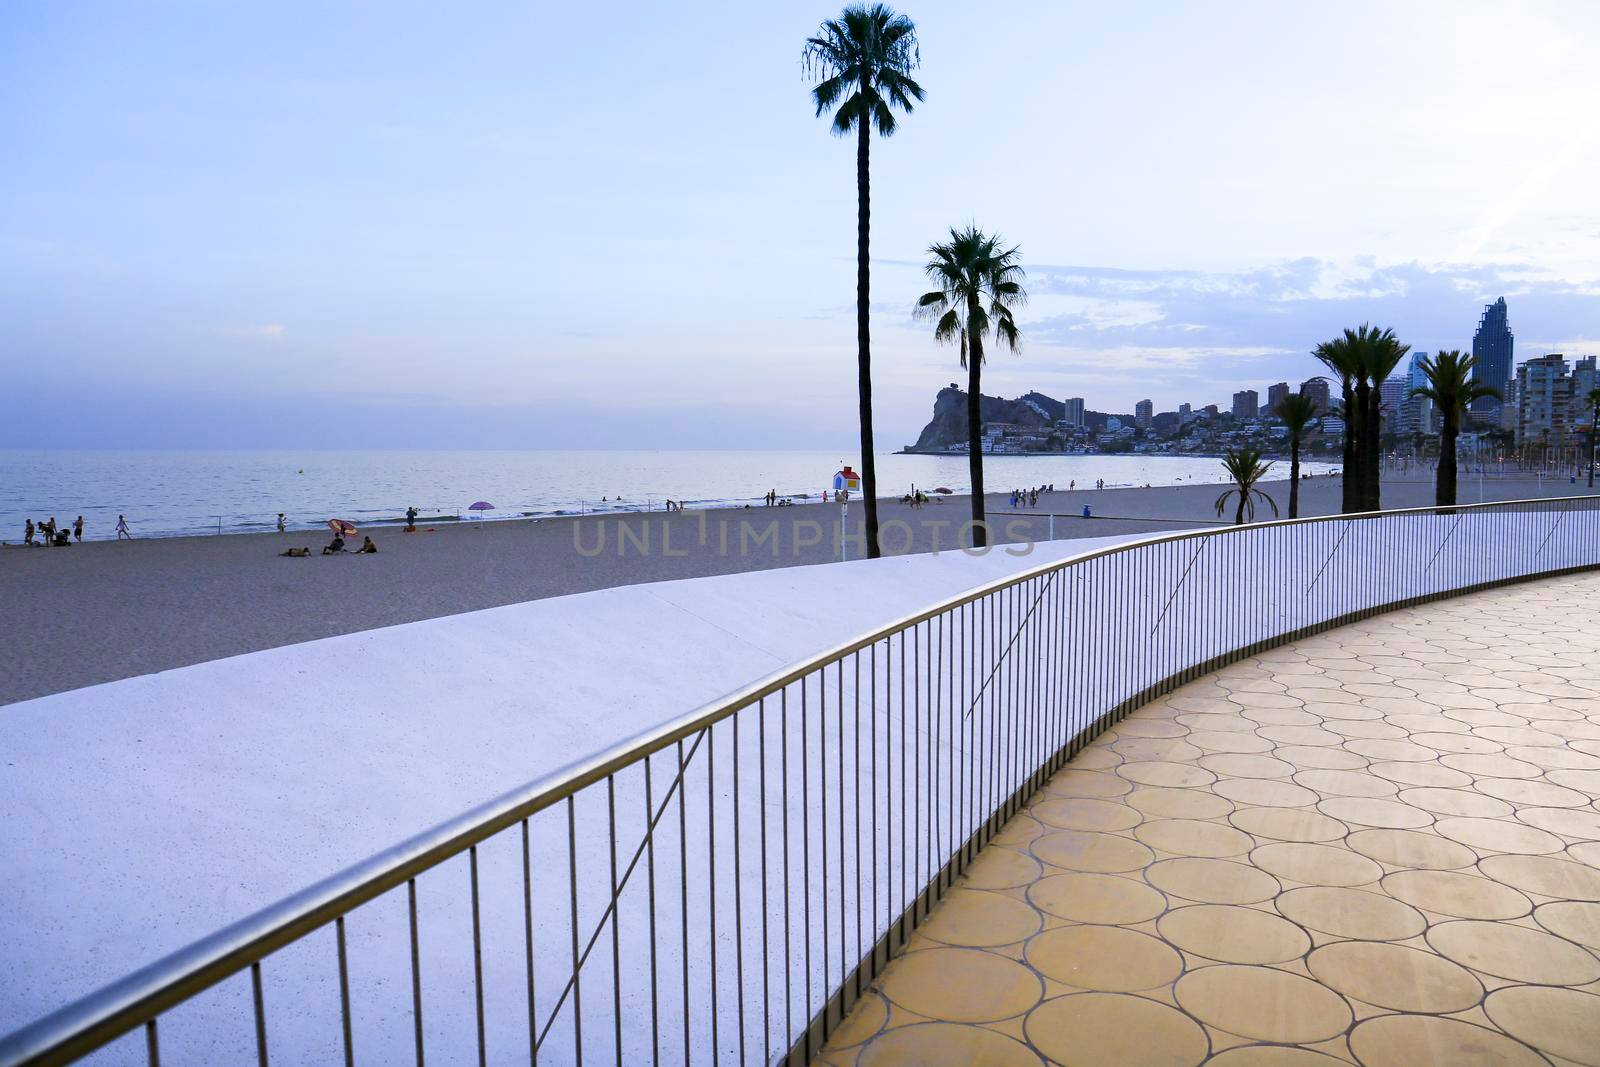 Benidorm, Alicante, Spain- September 11, 2022: Poniente beach with its beautiful promenade with access to the beach and viewpoint with modern design